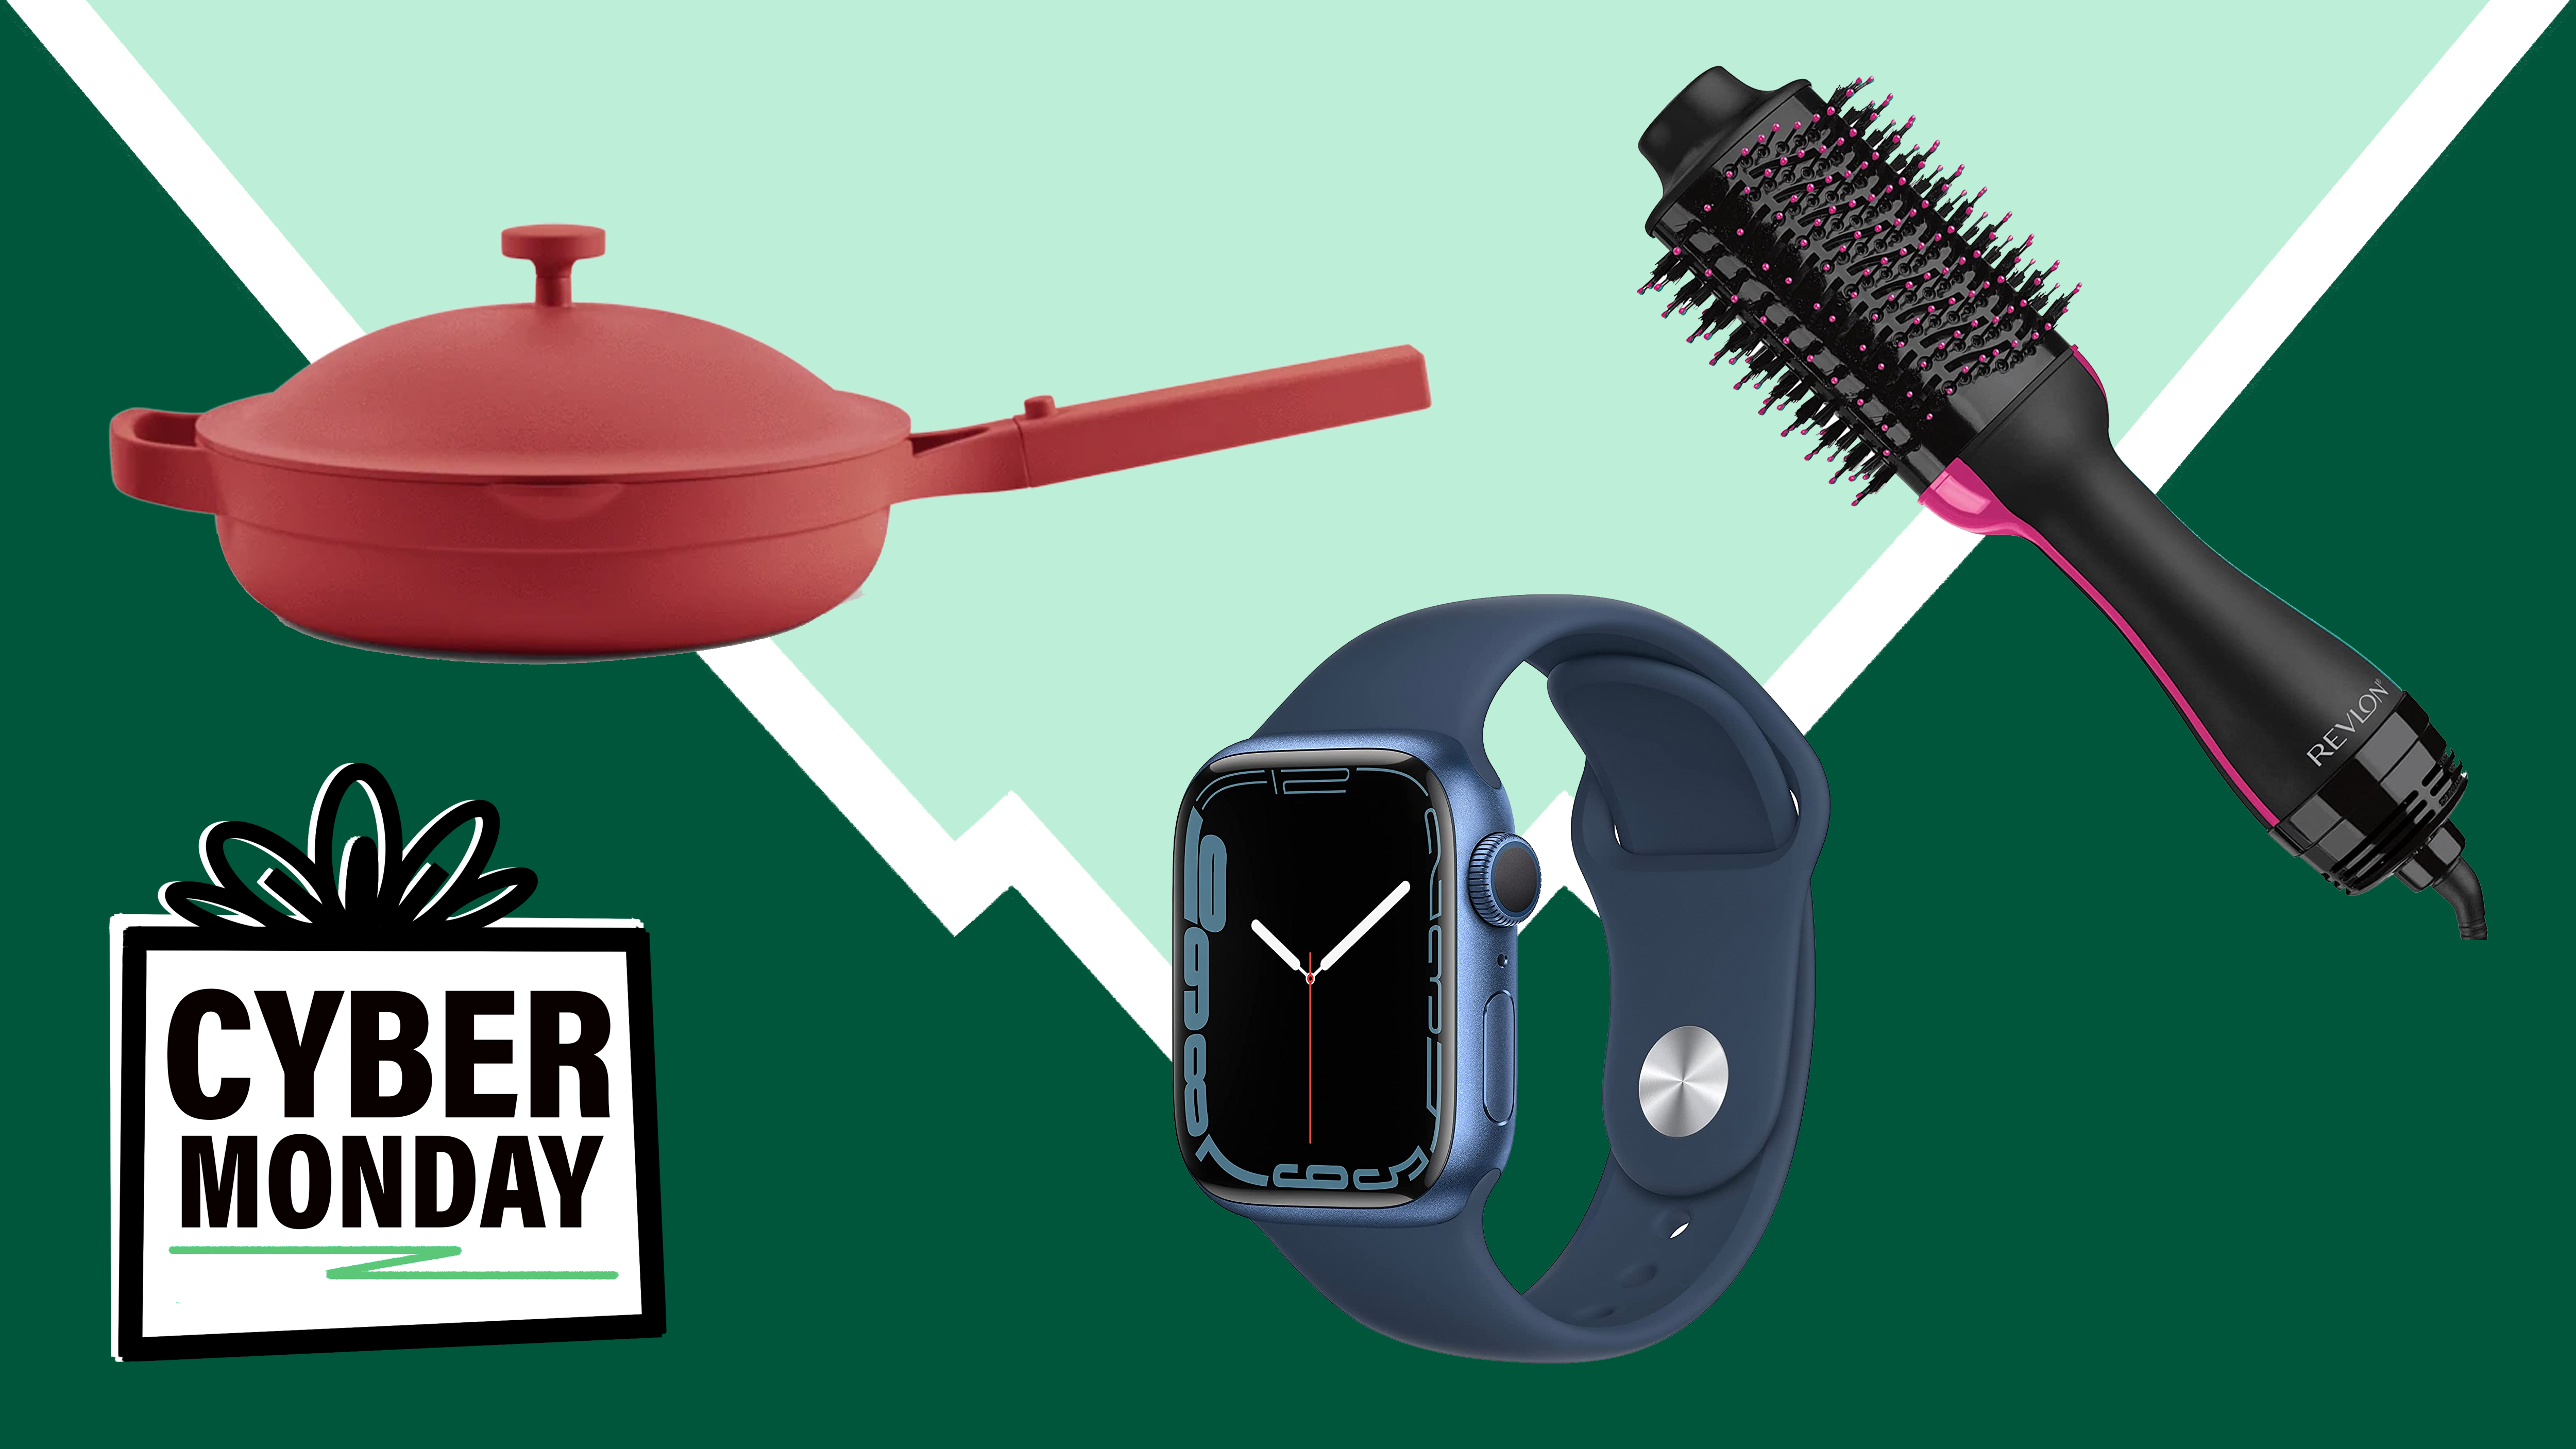 We're live tracking the 25 best gifts for women on sale during Cyber Monday 2021: Get up to 50% off AncestryDNA, Revlon and more